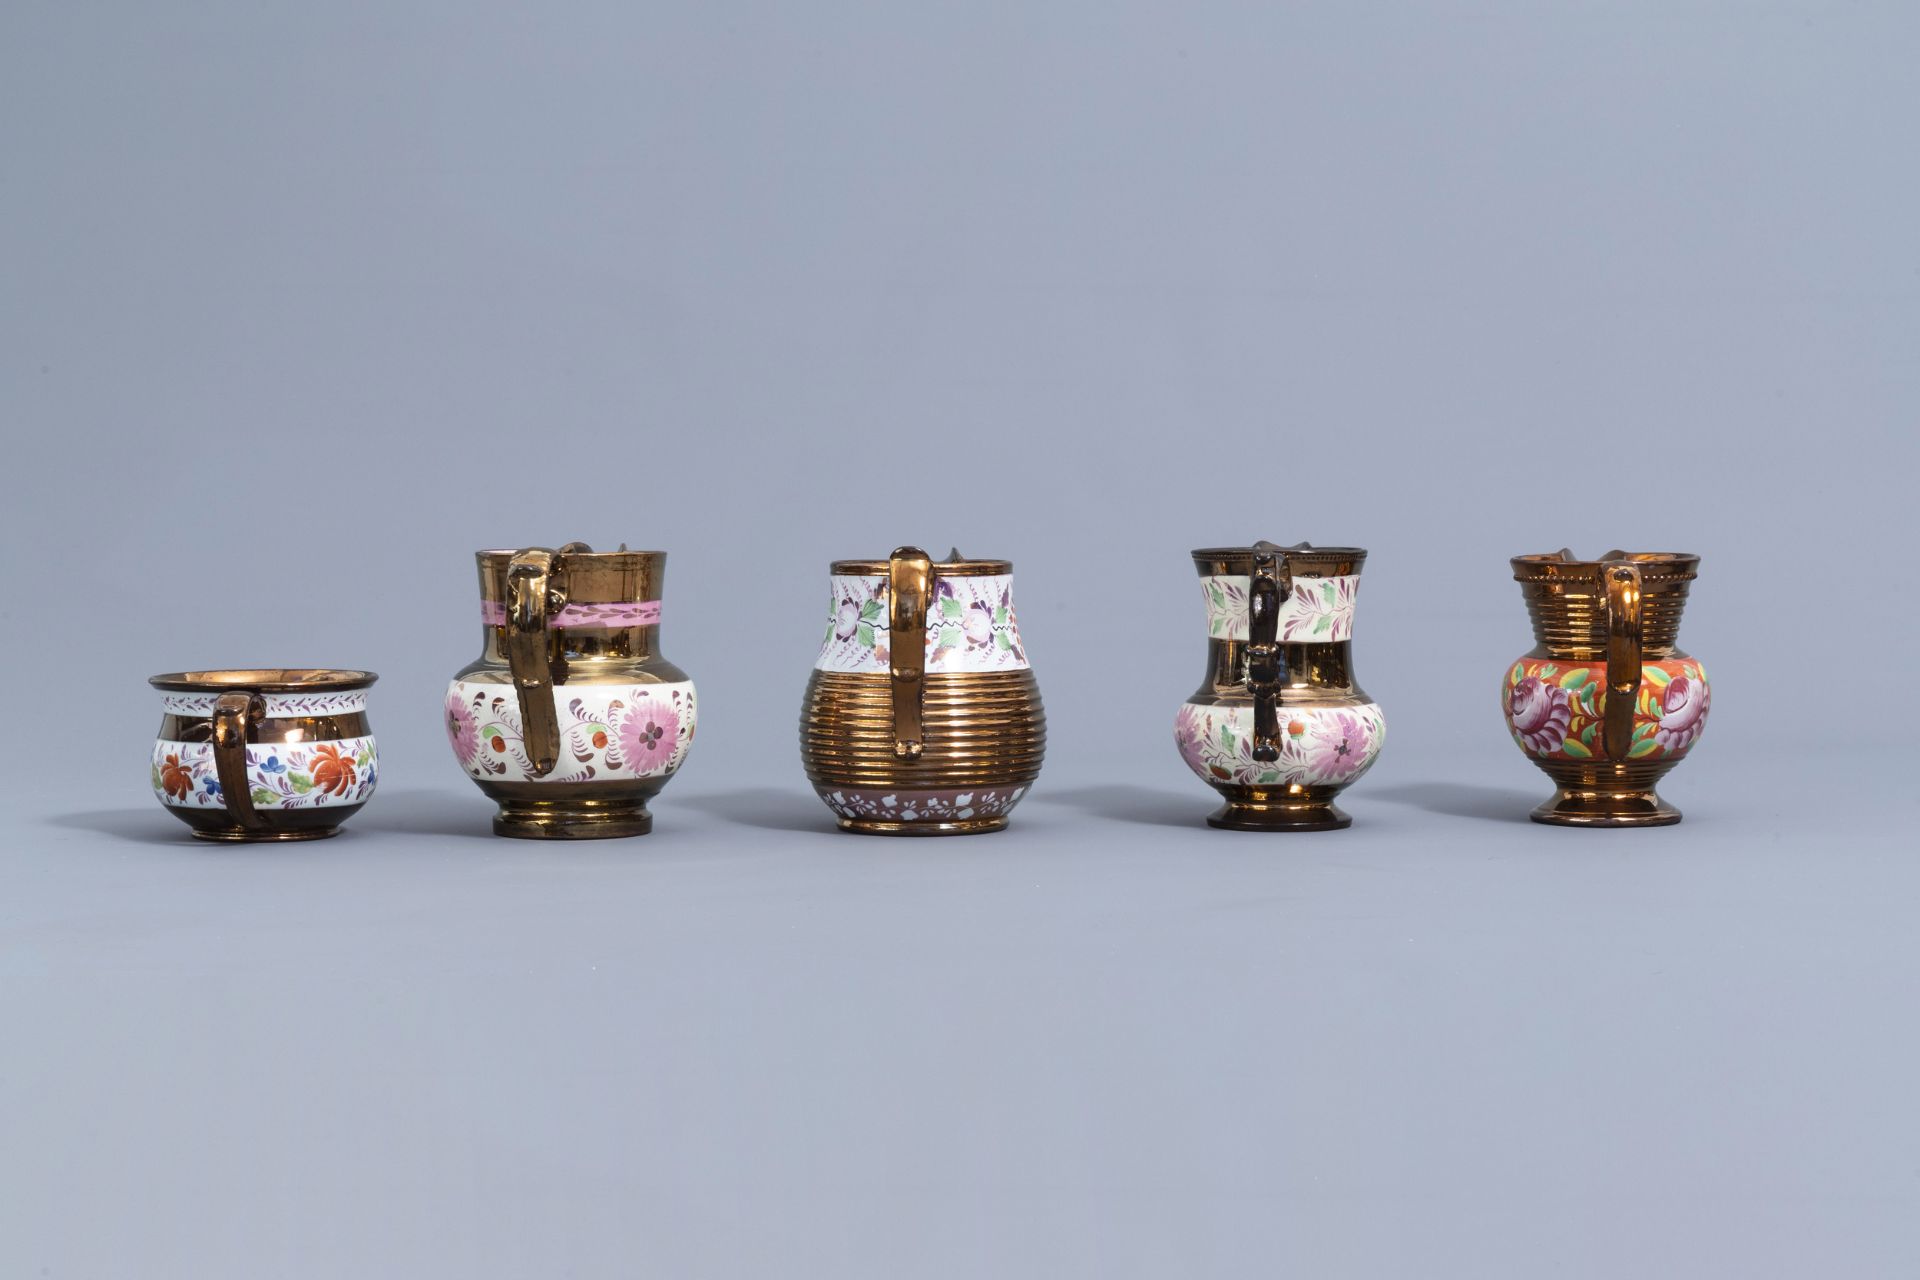 A varied collection of English lustreware items with polychrome floral design, 19th C. - Image 9 of 64